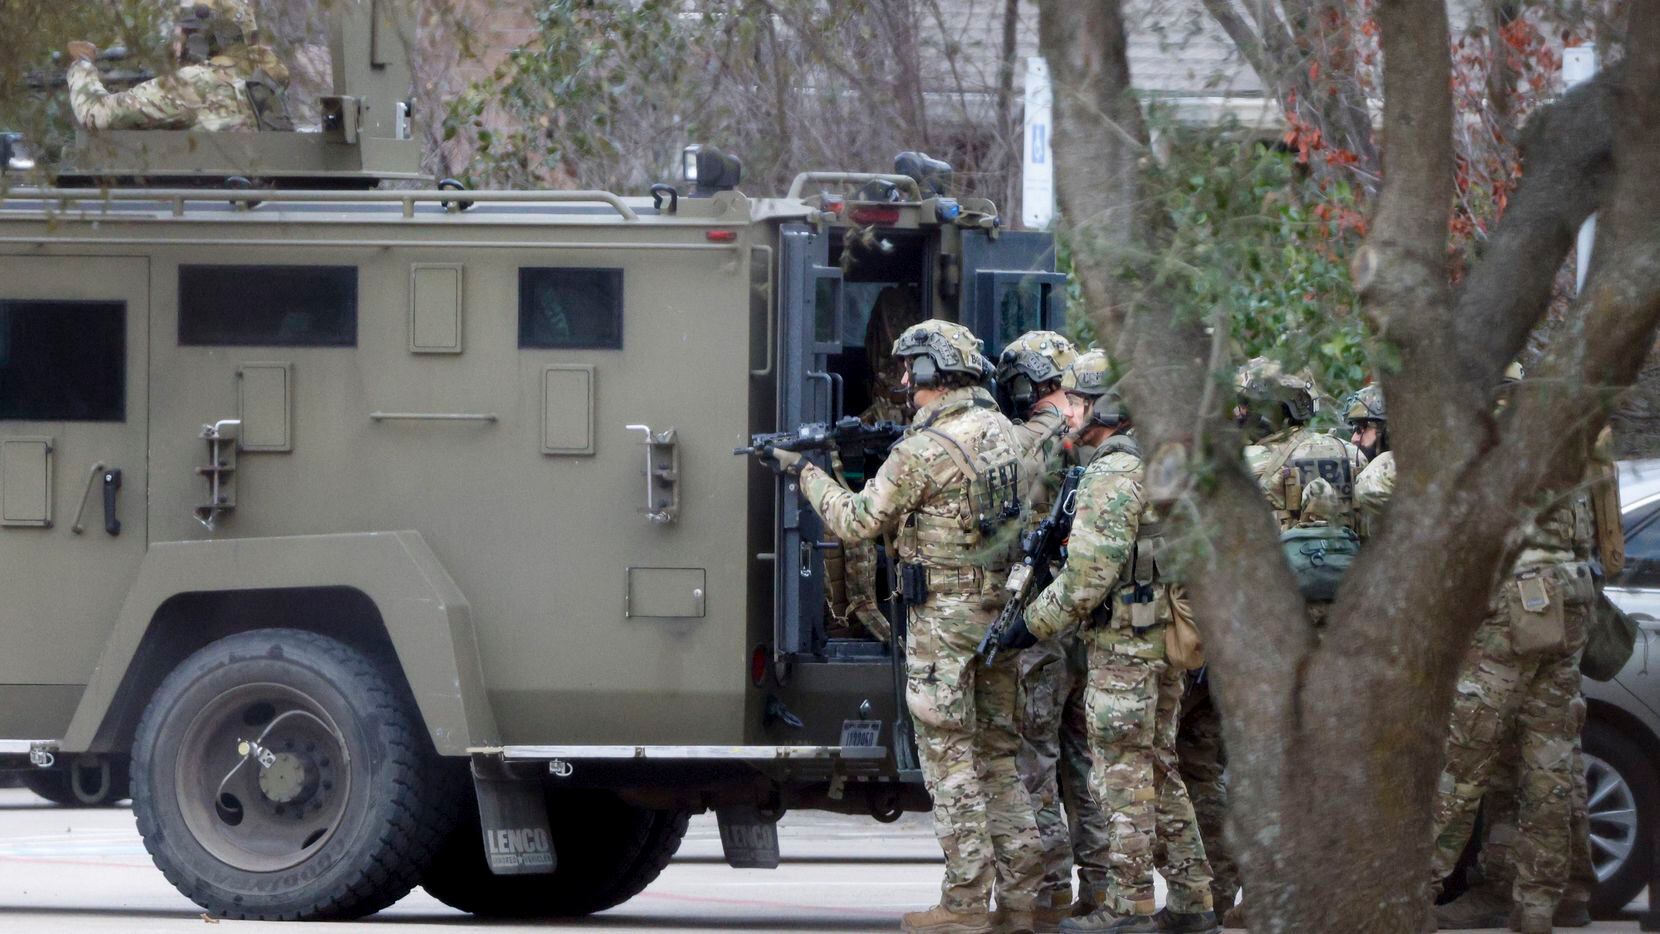 A law-enforcement team stages behind an armored vehicle outside Congregation Beth Israel in...